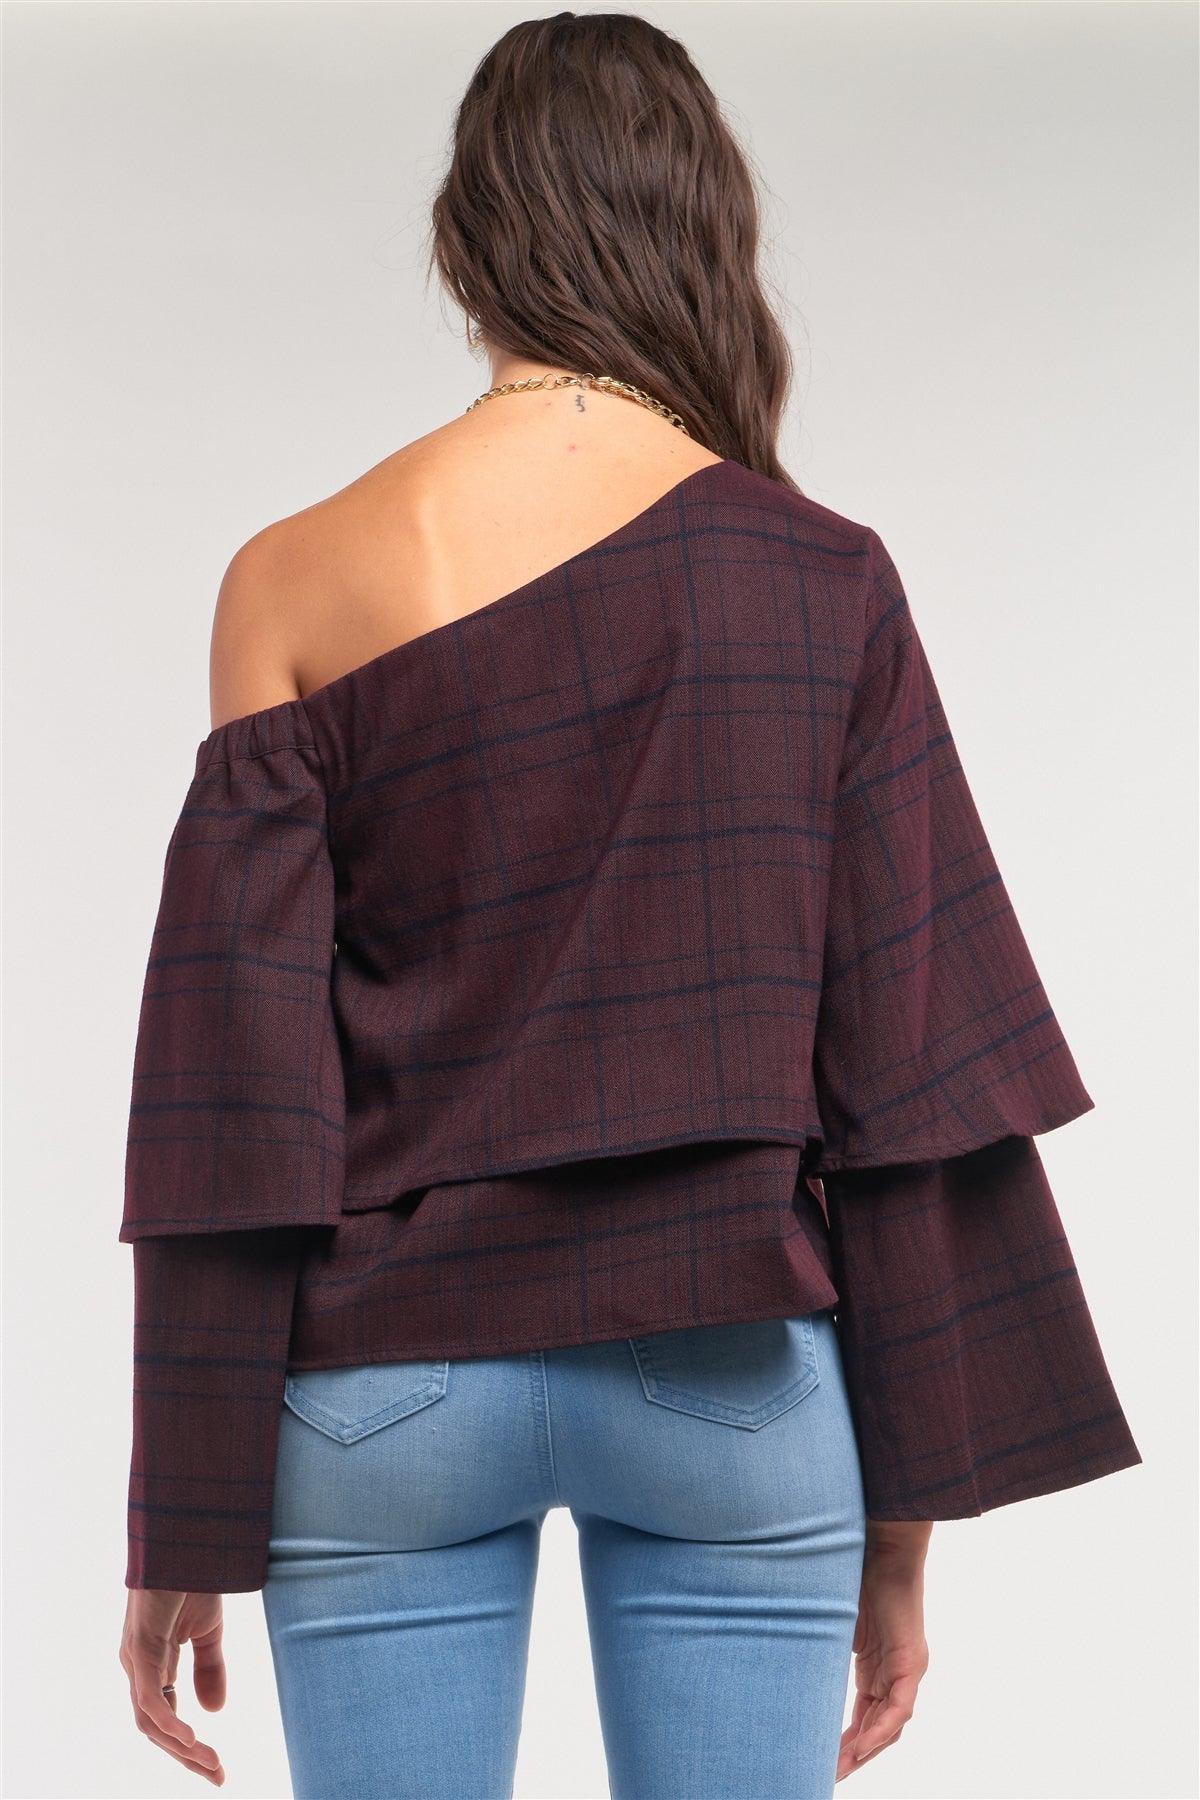 Plum Navy Plaid One-Shoulder Long Sleeve Loose Fit Layered Top /1-2-3